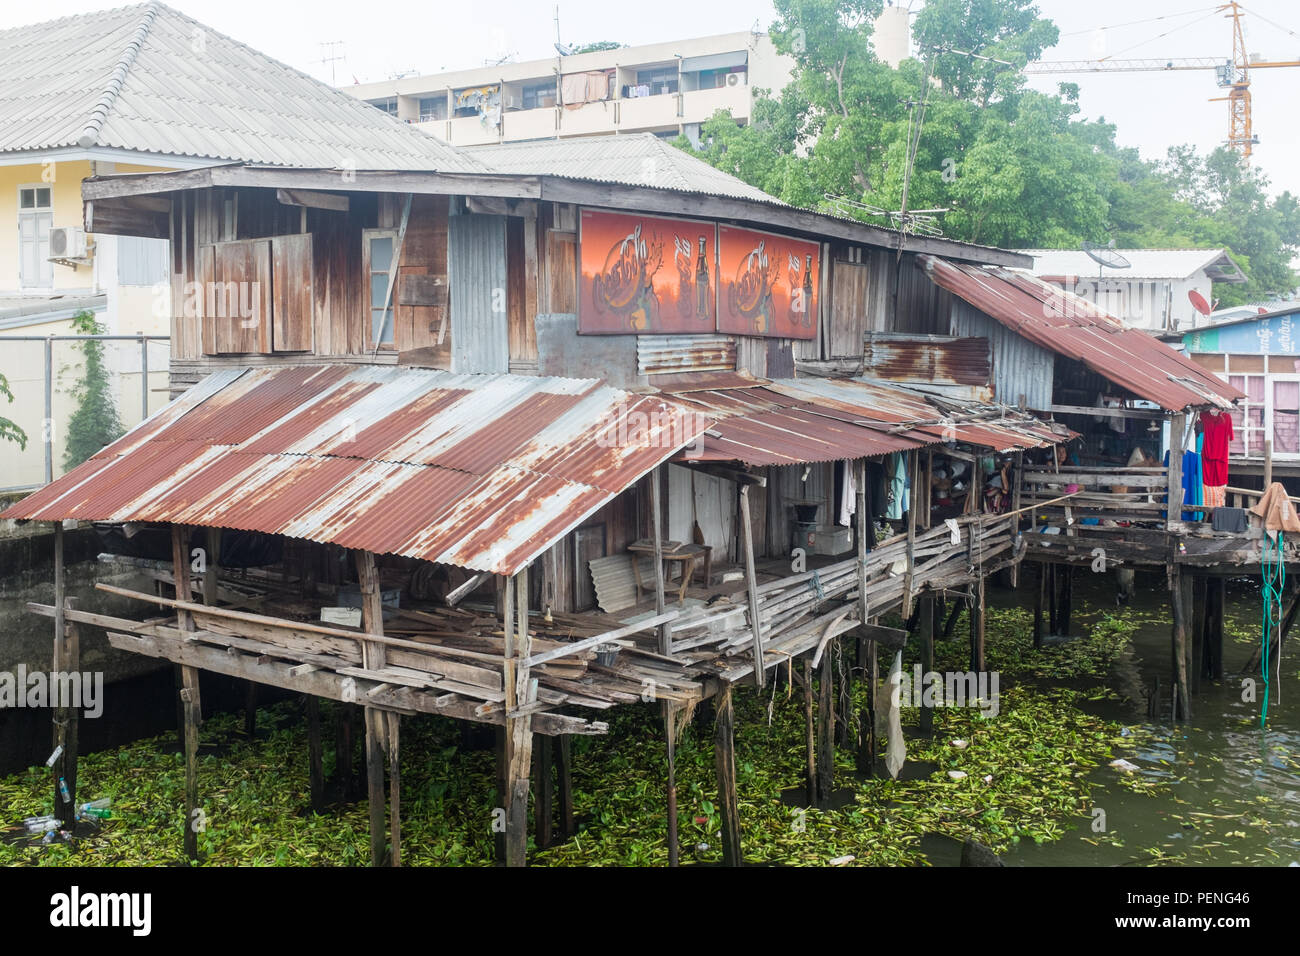 Self built wood and corrugated iron house built on stilts on the Chao Phraya River in Bangkok, Thailand Stock Photo